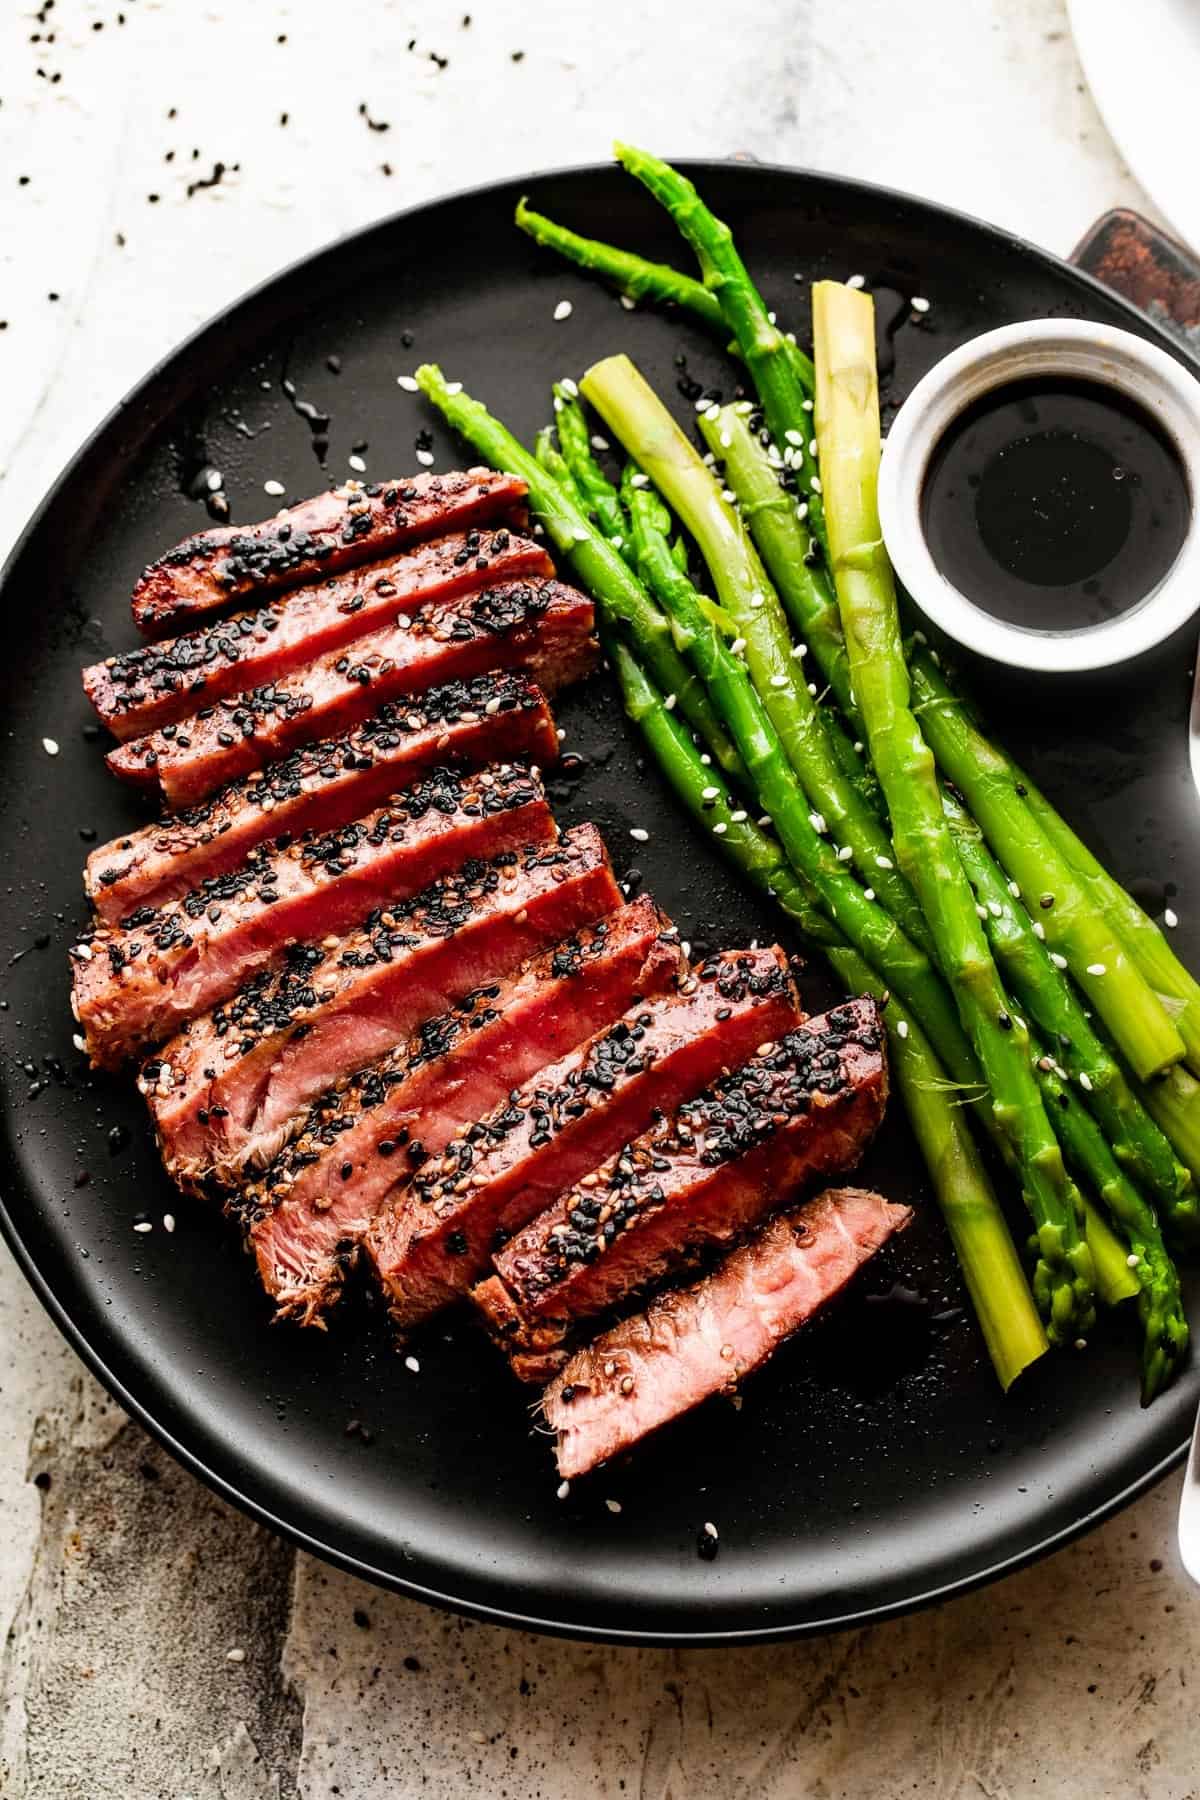 Sliced pan seared sesame crusted tuna steak and served on a black dinner plate with a side of asparagus and soy sauce in a bowl for dipping.